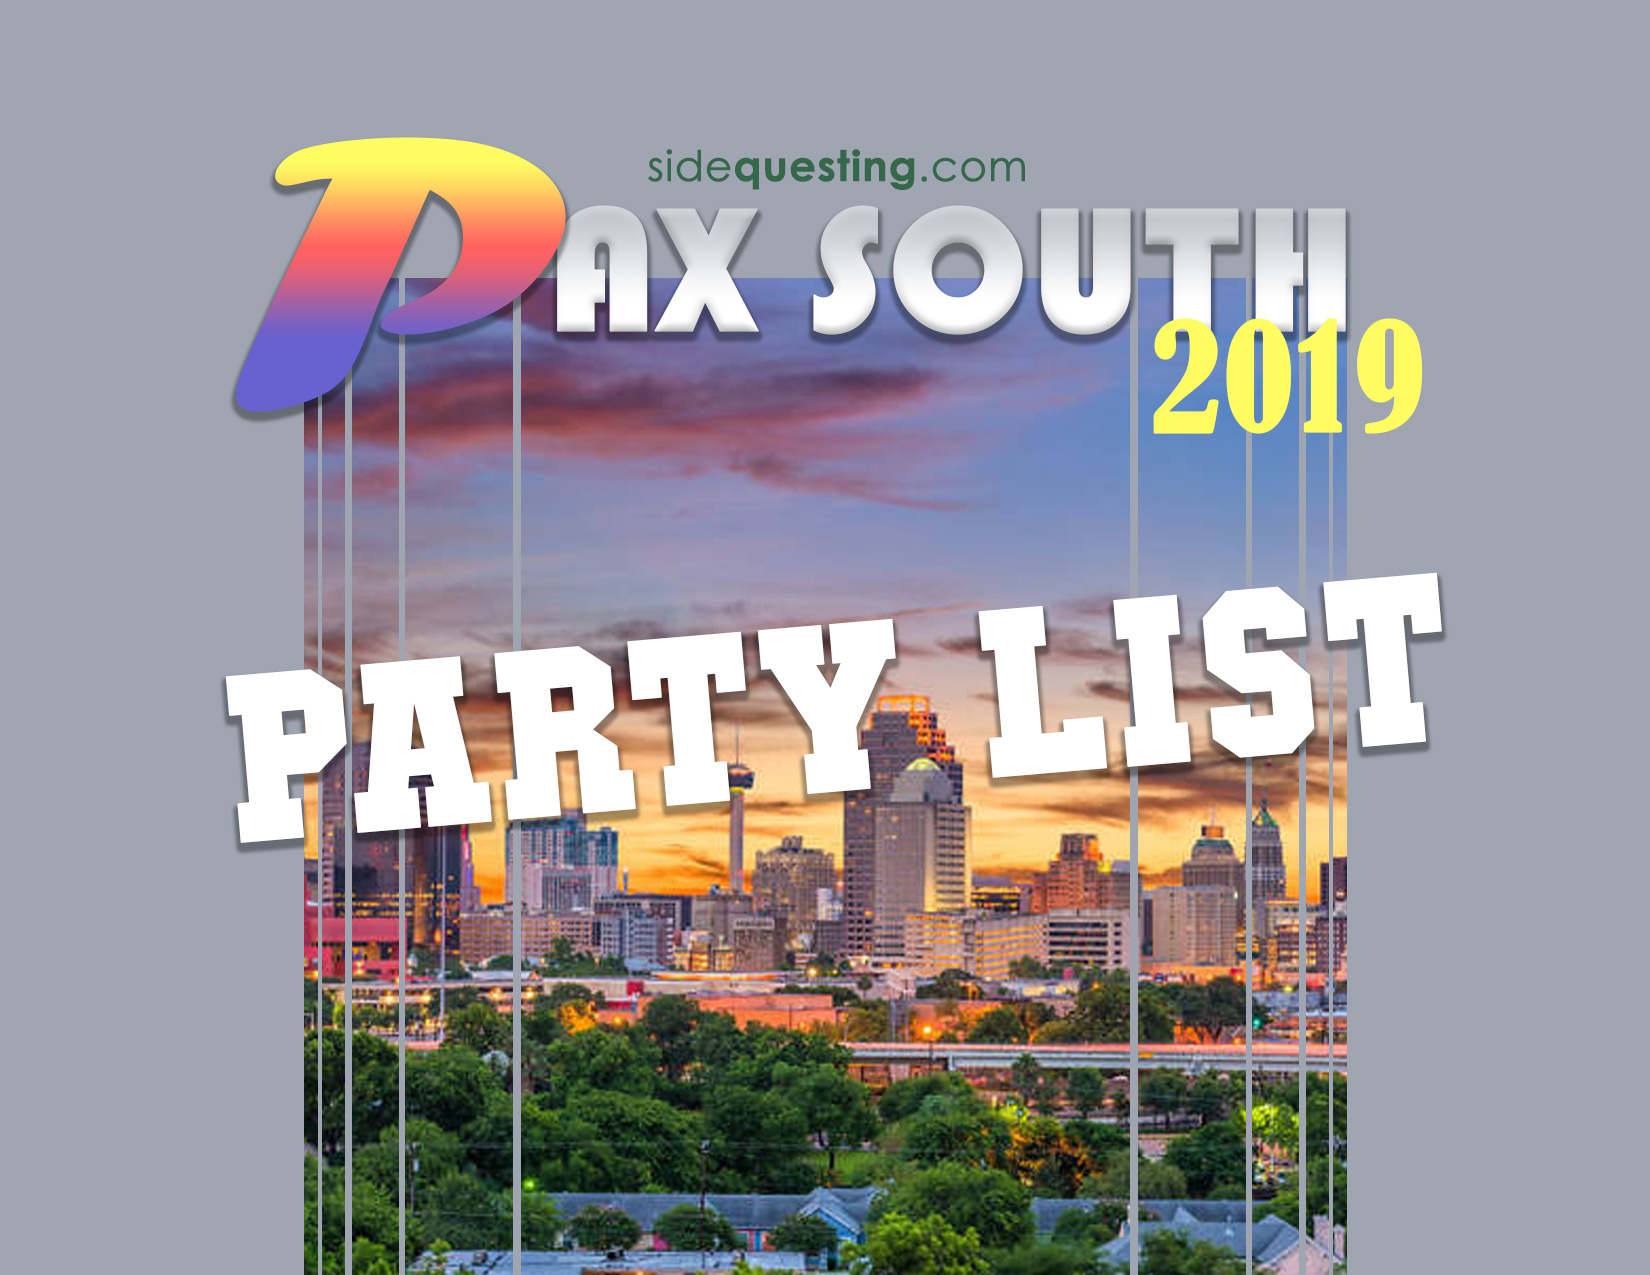 The 2019 PAX South Party List – Parties, events, concerts and more!